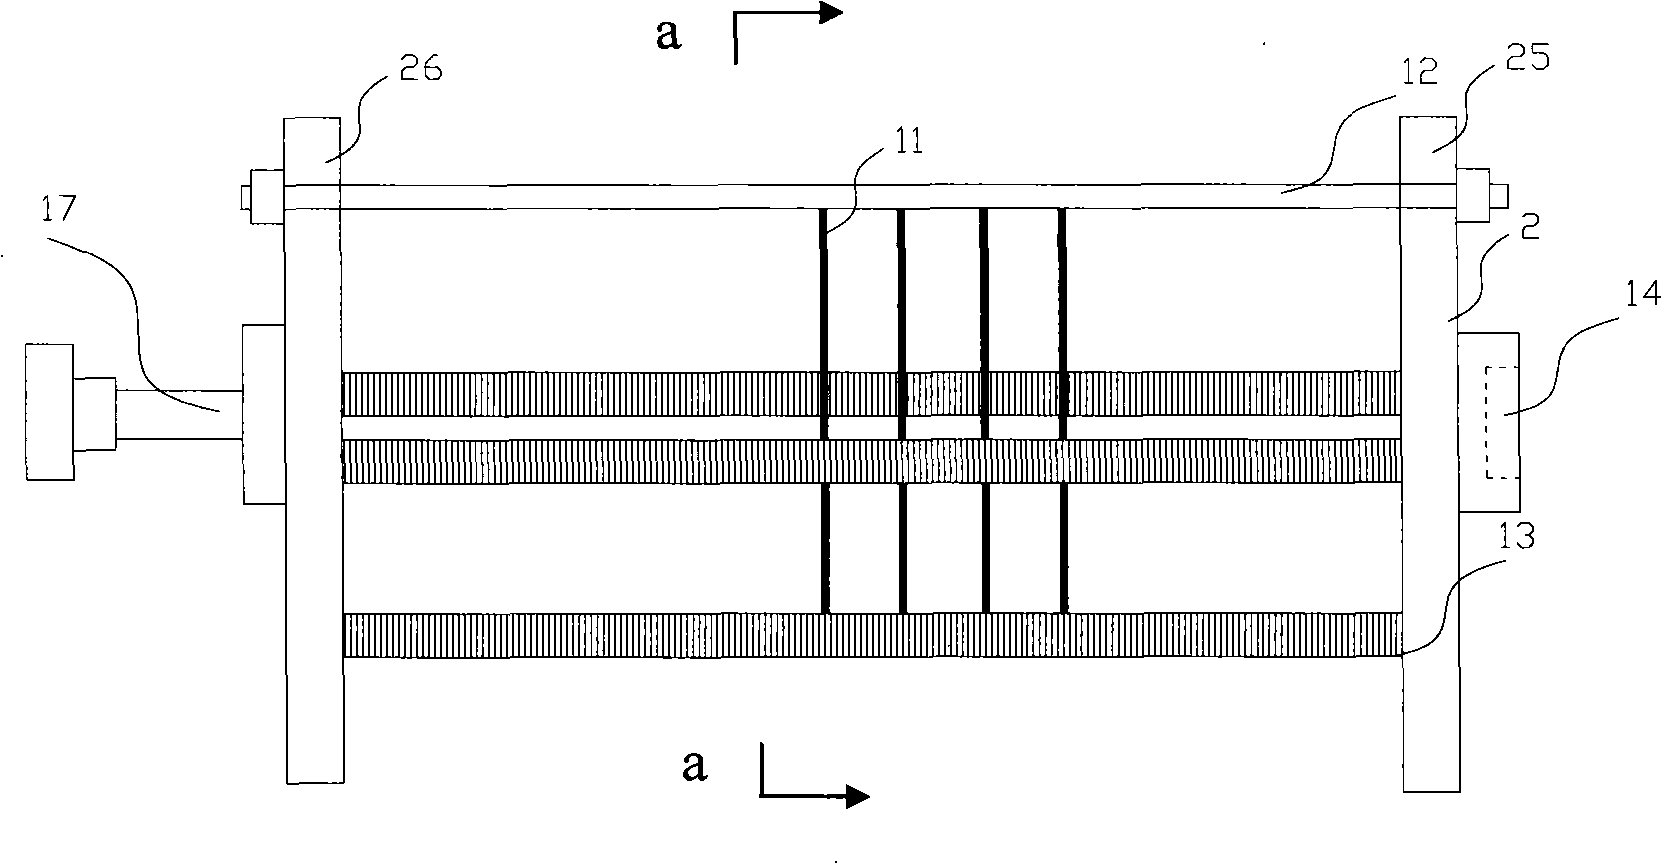 Whirl etching system and method for large area silicon chips